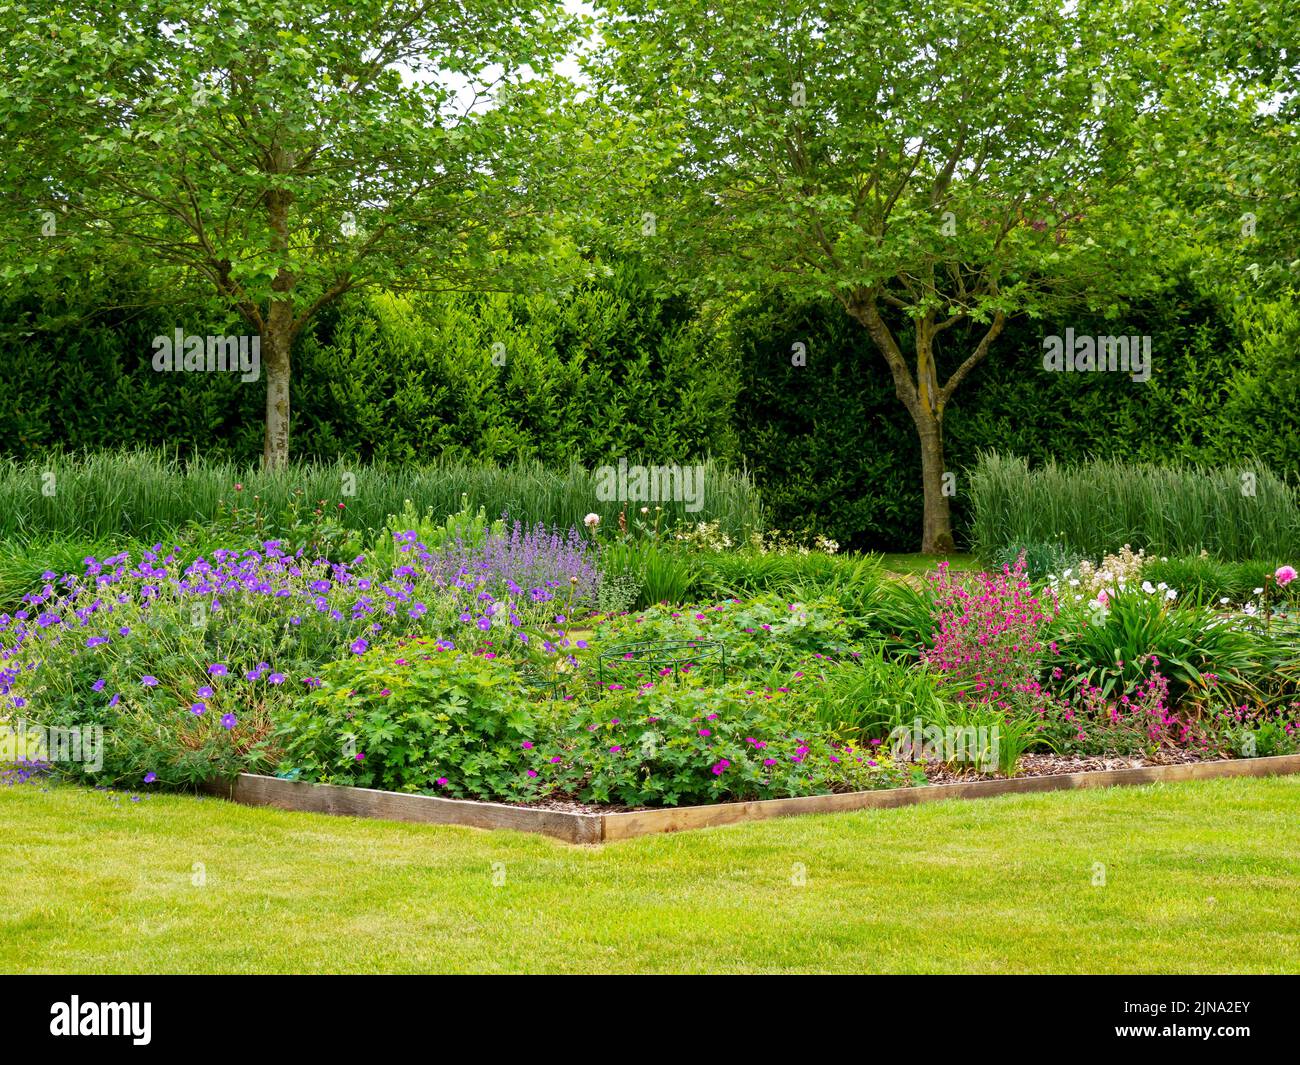 Flowerbeds and a green lawn in a summer garden Stock Photo